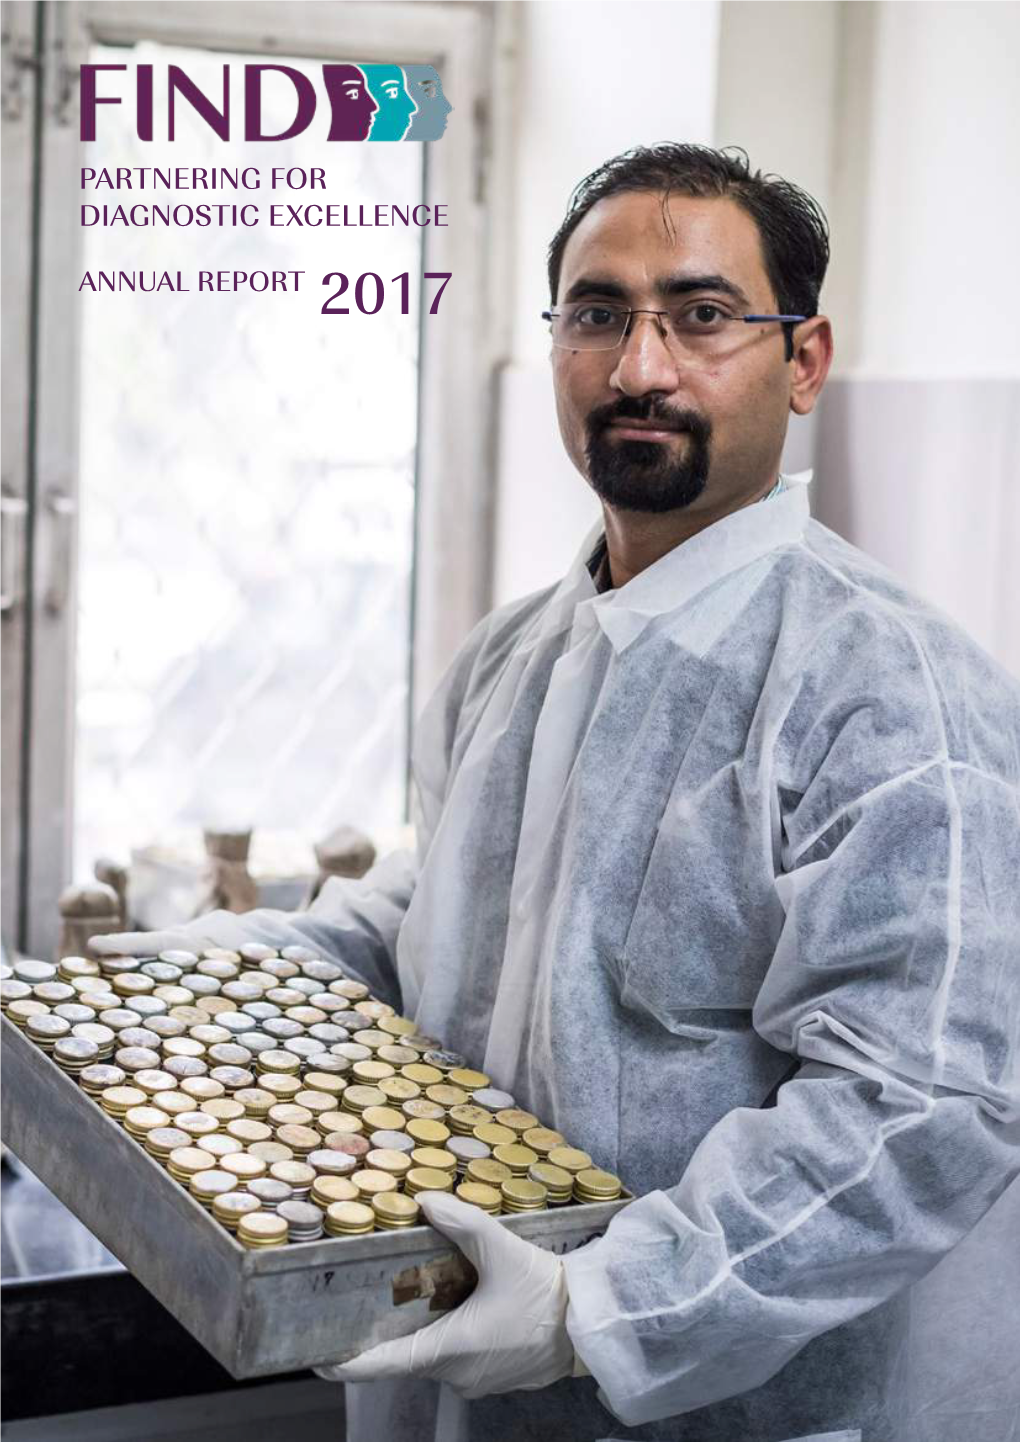 PARTNERING for DIAGNOSTIC EXCELLENCE ANNUAL REPORT 2017 Our Vision a World Where Diagnosis Guides the Way to Health for All People